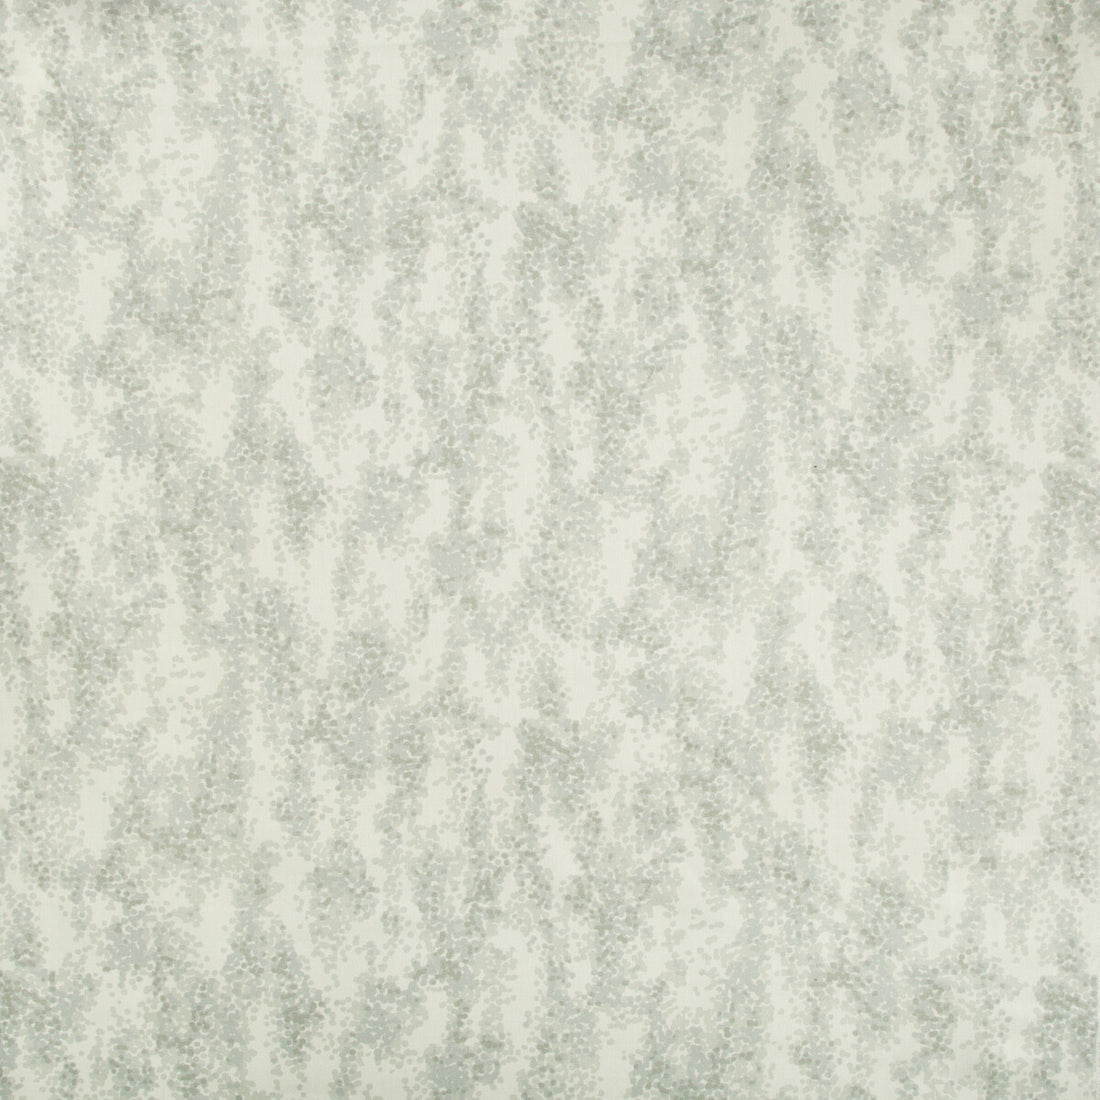 Plein Air fabric in quartz color - pattern PLEIN AIR.1611.0 - by Kravet Couture in the Barbara Barry Panorama collection